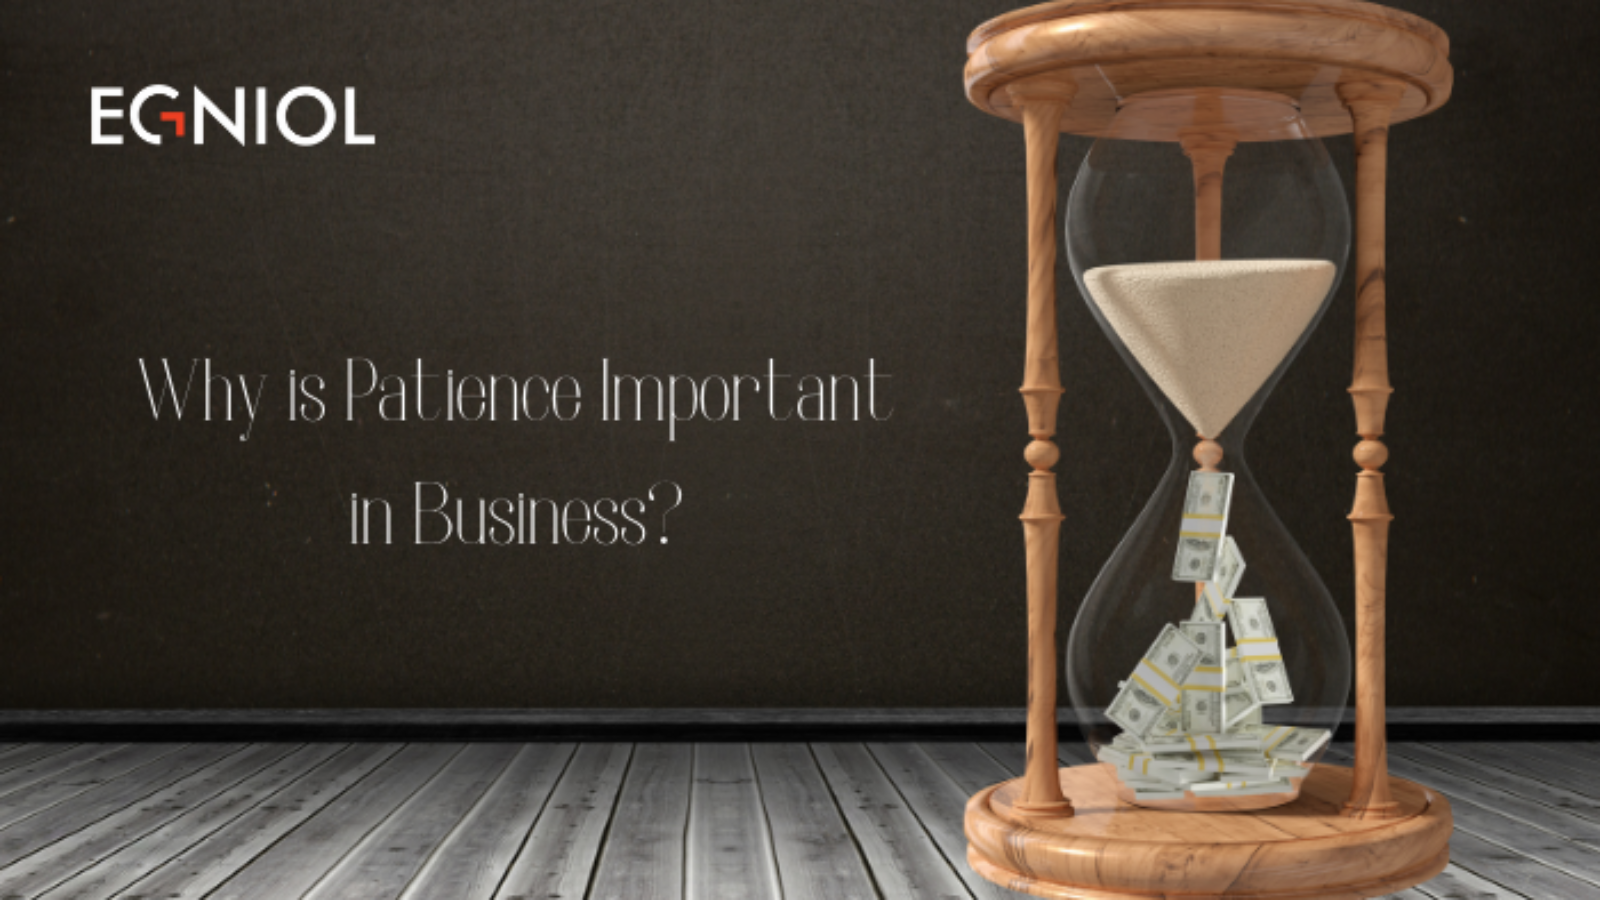 Why Patience Important in Business? - By Egniol